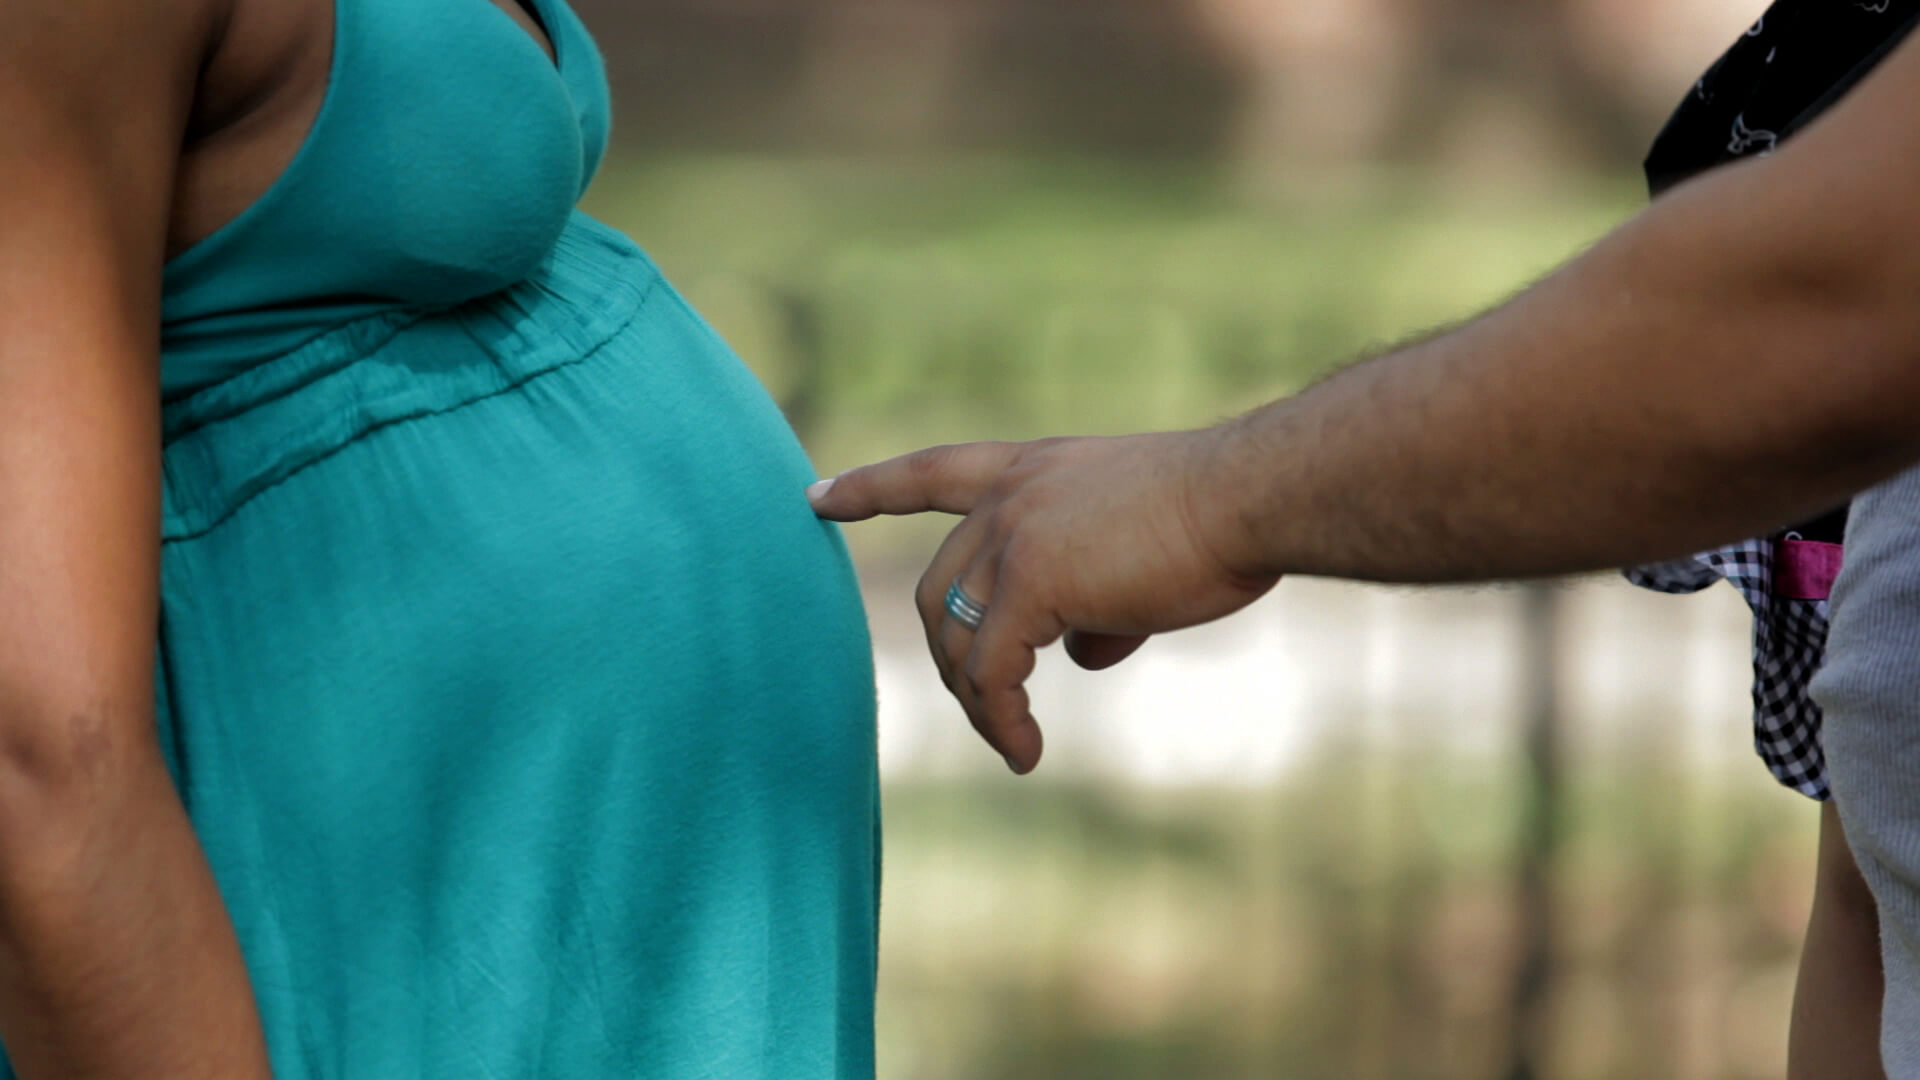 Still from Tough Love. Close-up of a hand pointing at a pregnant belly.